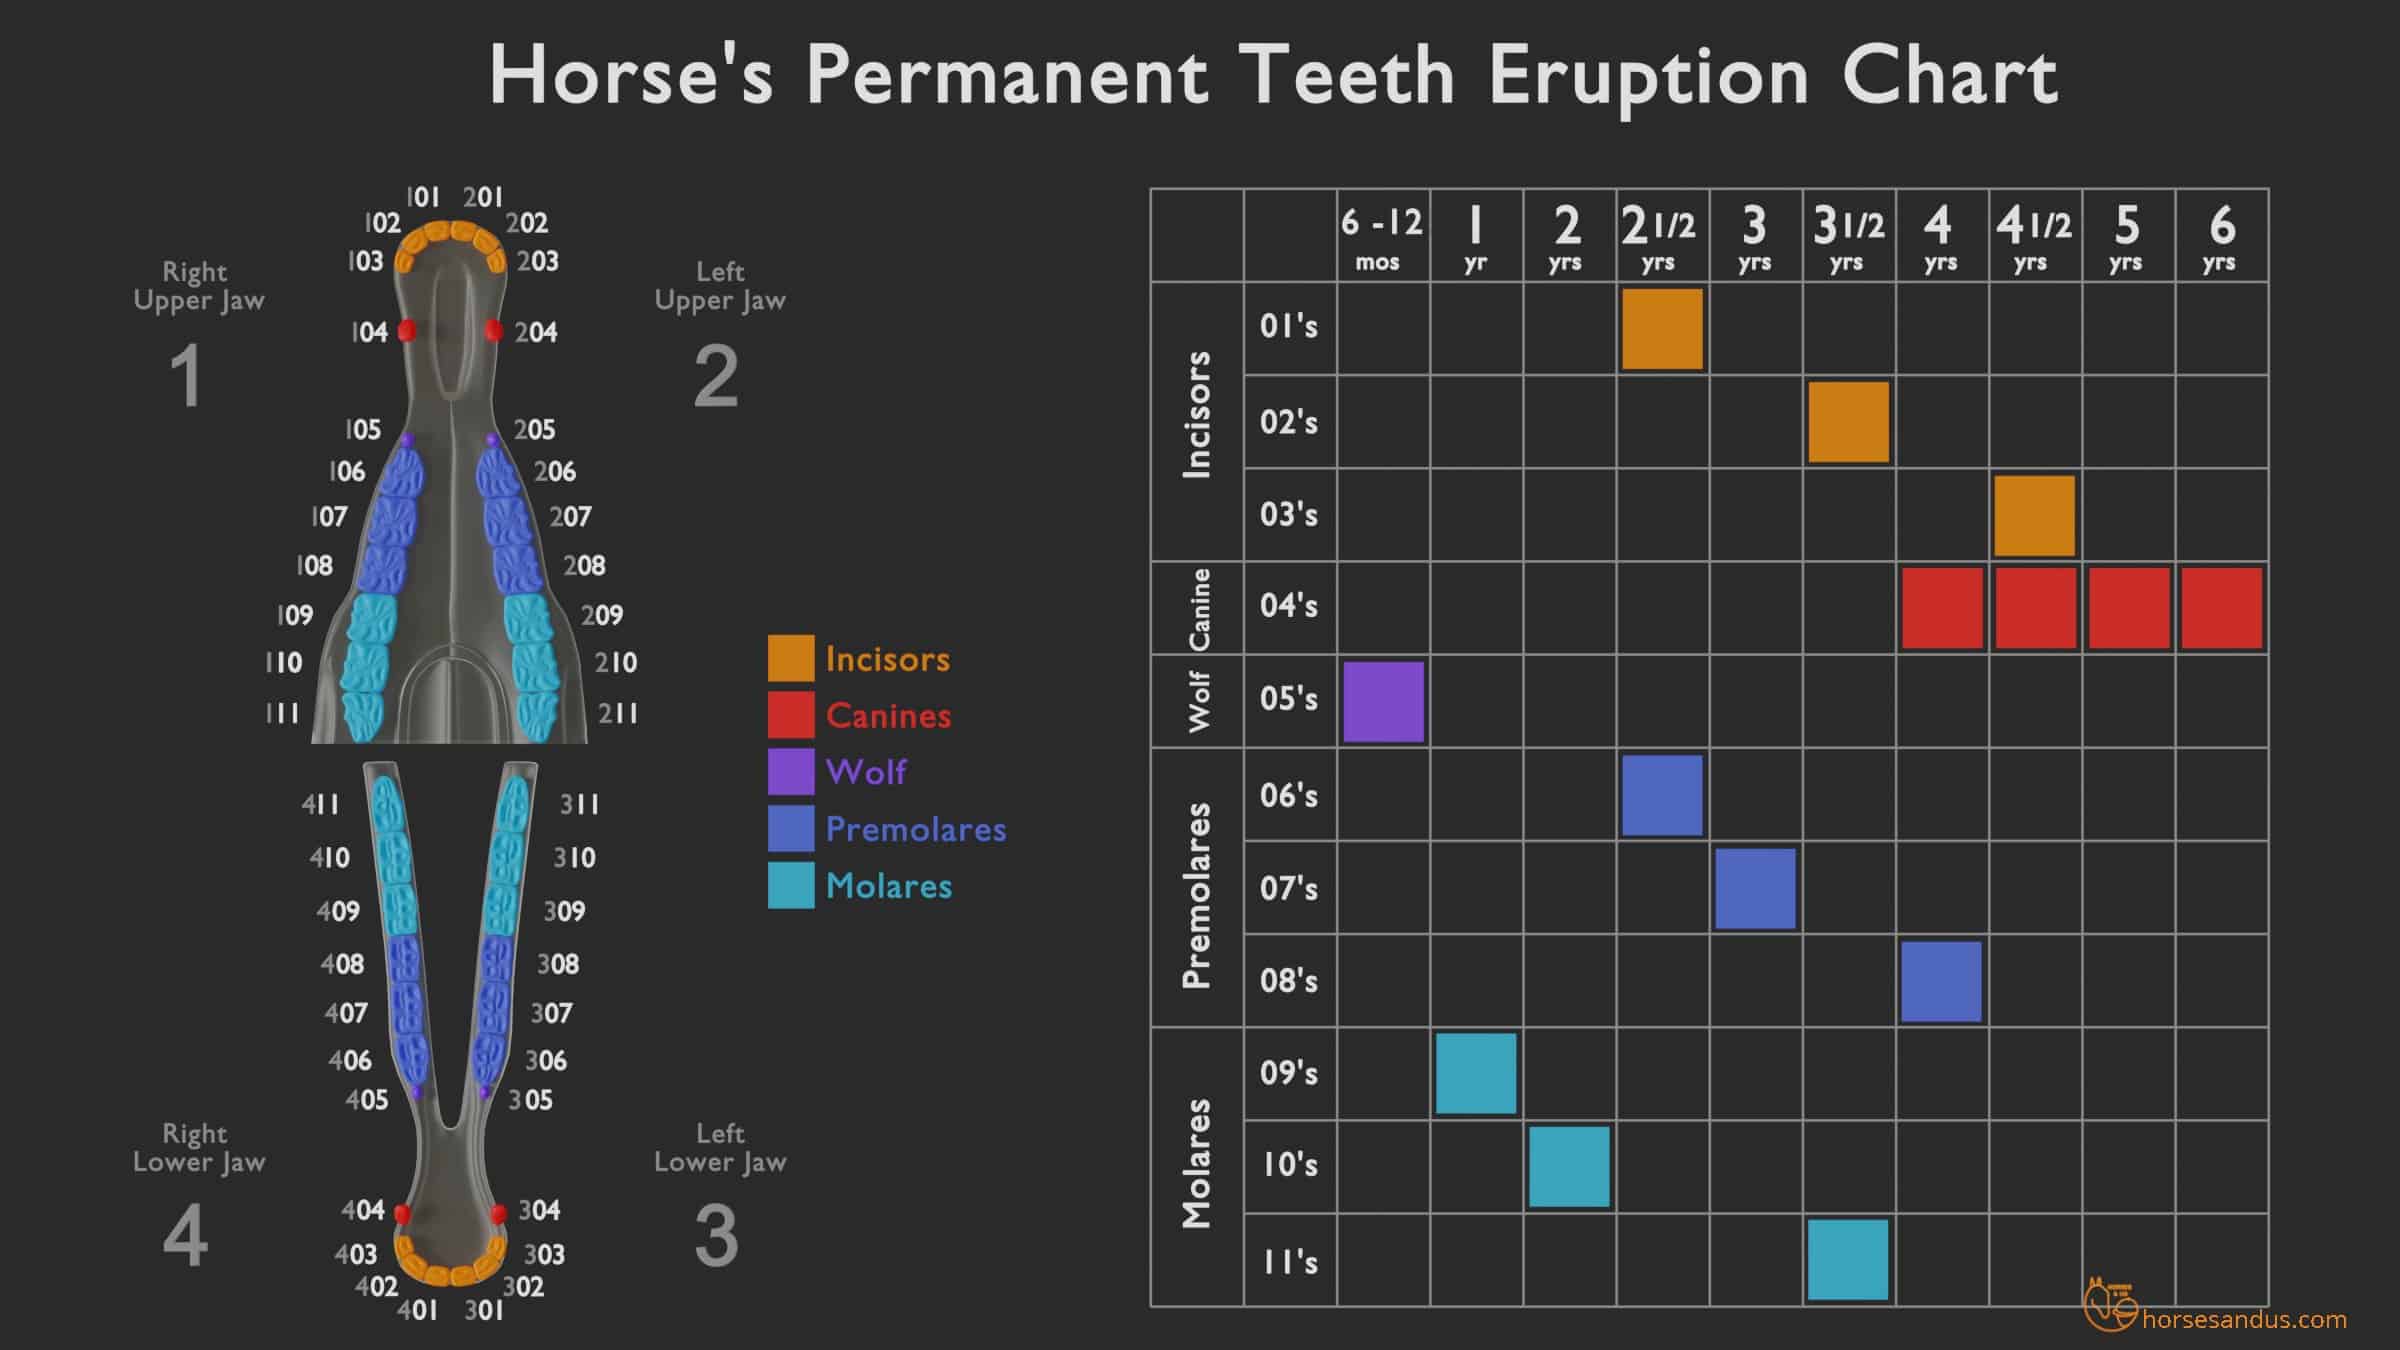 Aging a horse by his teeth - Permanent teeth eruption chart